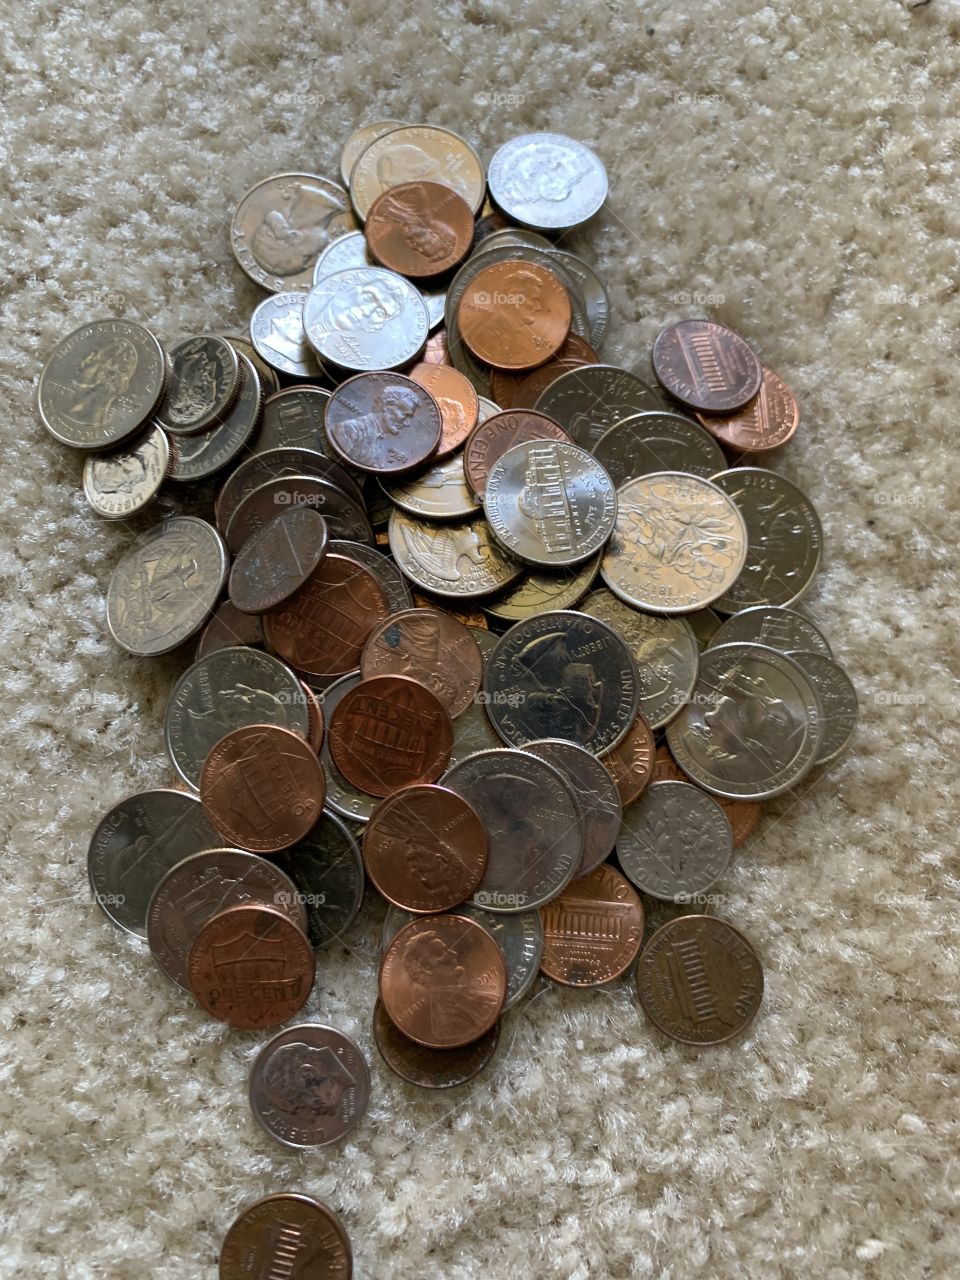 A pile of American coins saved up for something nice